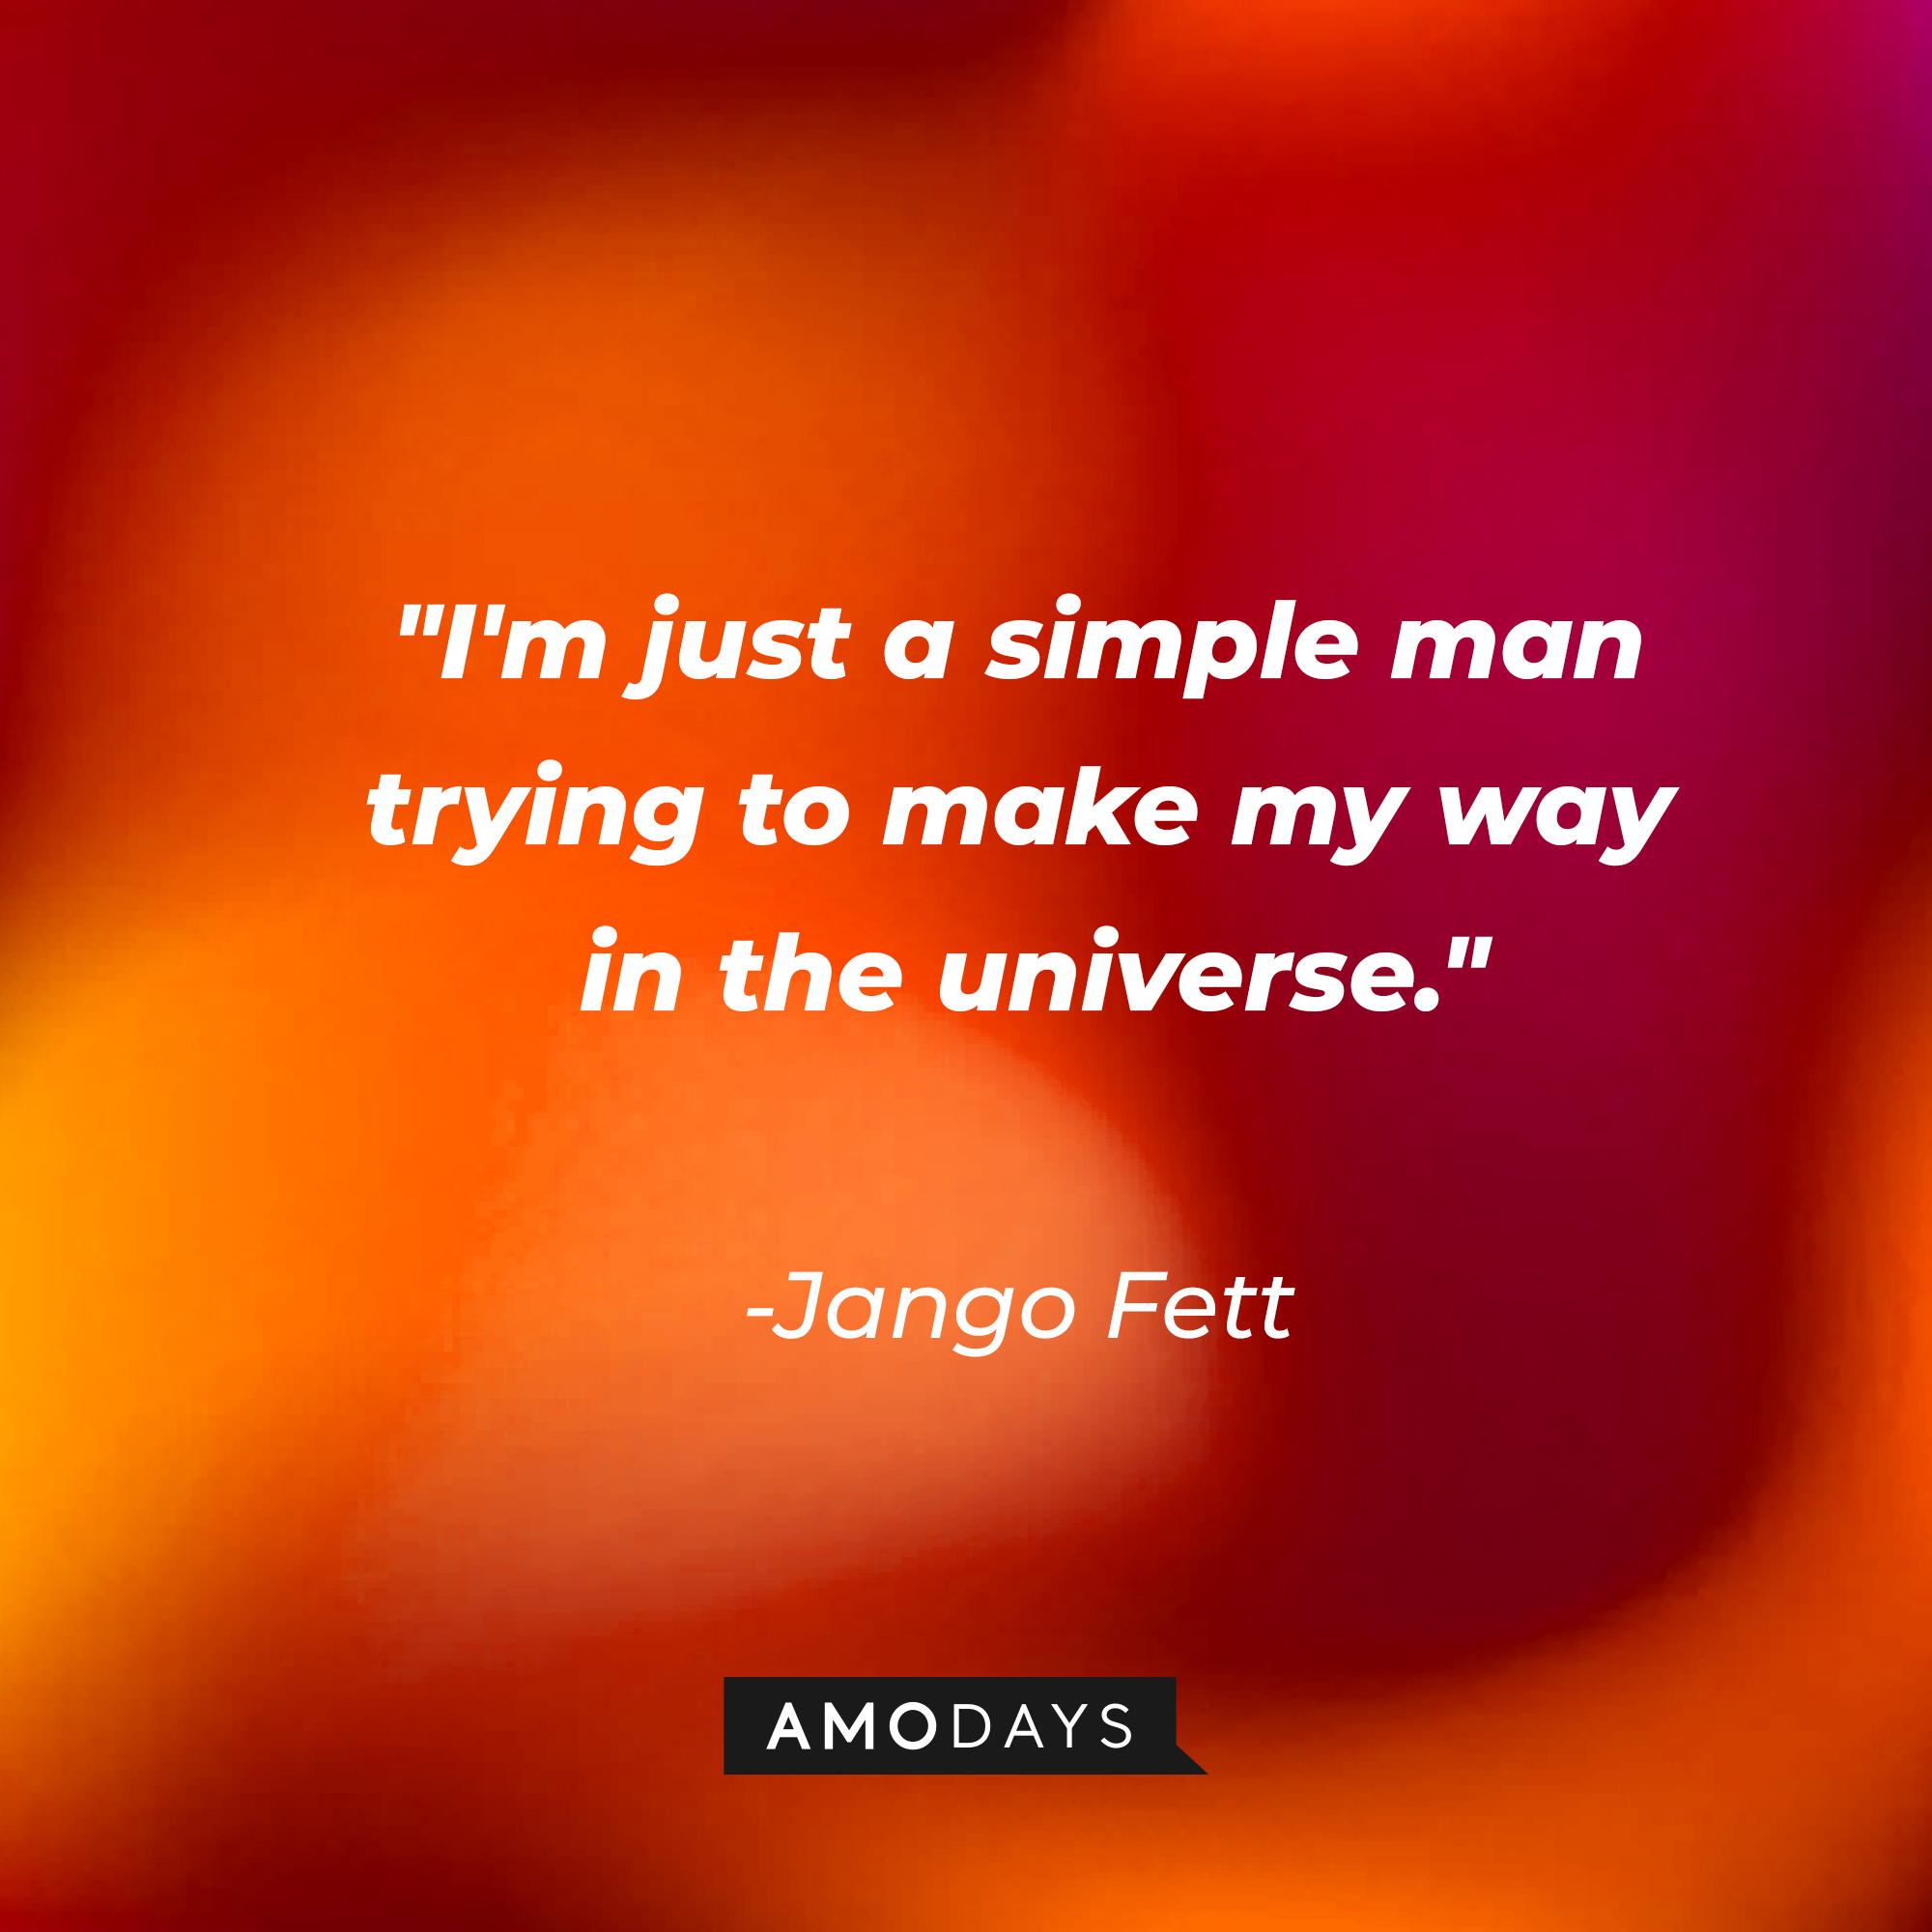 Jango Fett's quote: "I'm just a simple man trying to make my way in the universe." | Source: AmoDays